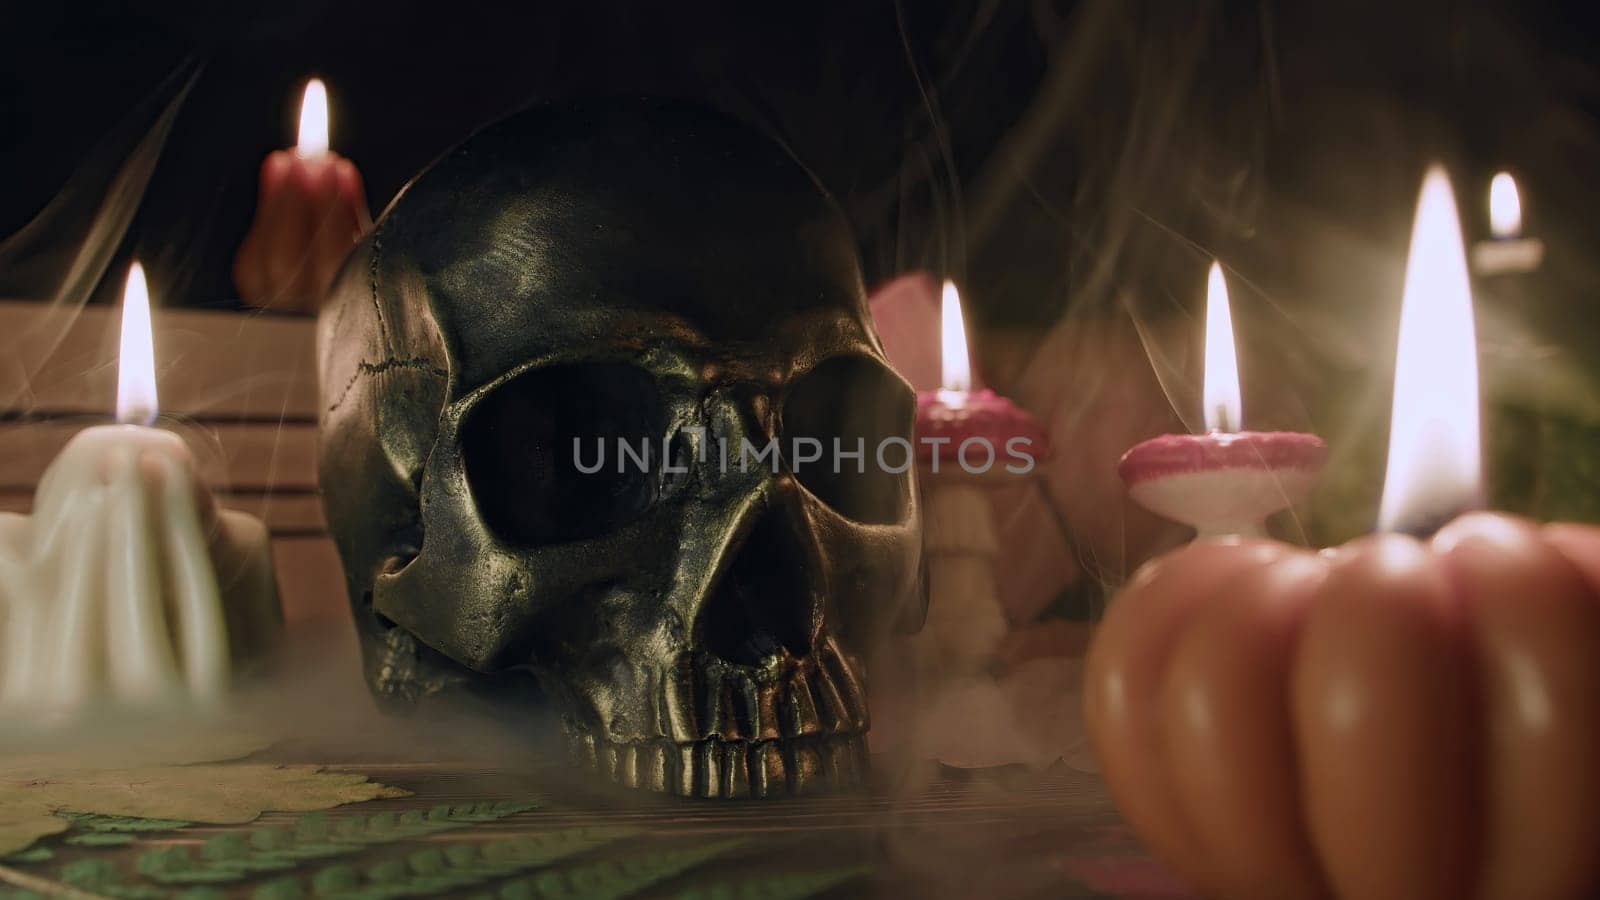 Mystique background - bronze human skull with candles. Visual gothic aesthetic. by kristina_kokhanova